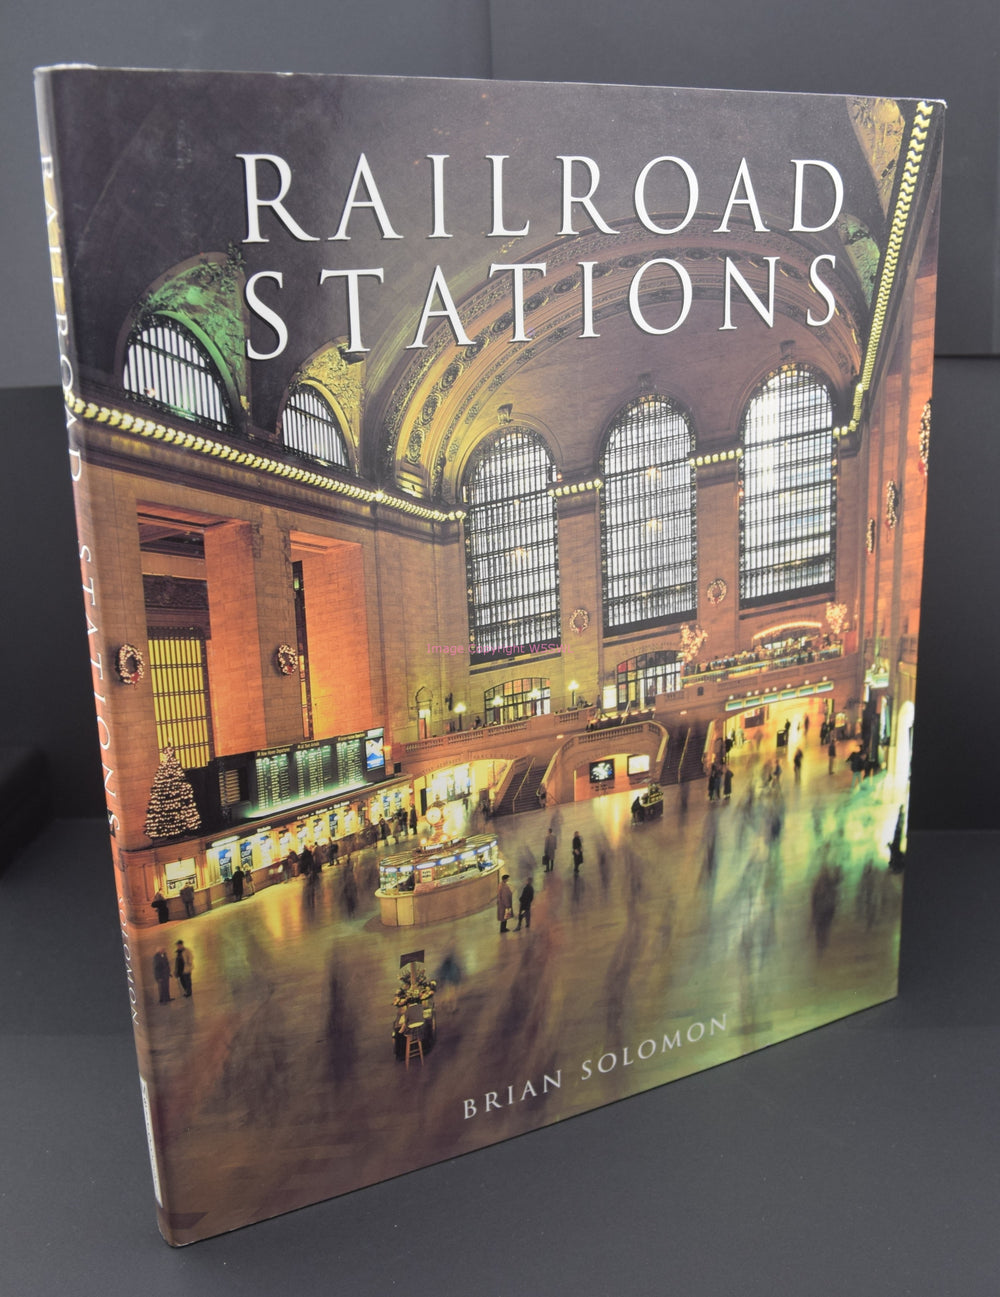 Railroad Stations by Brian Solomon - Dave's Hobby Shop by W5SWL